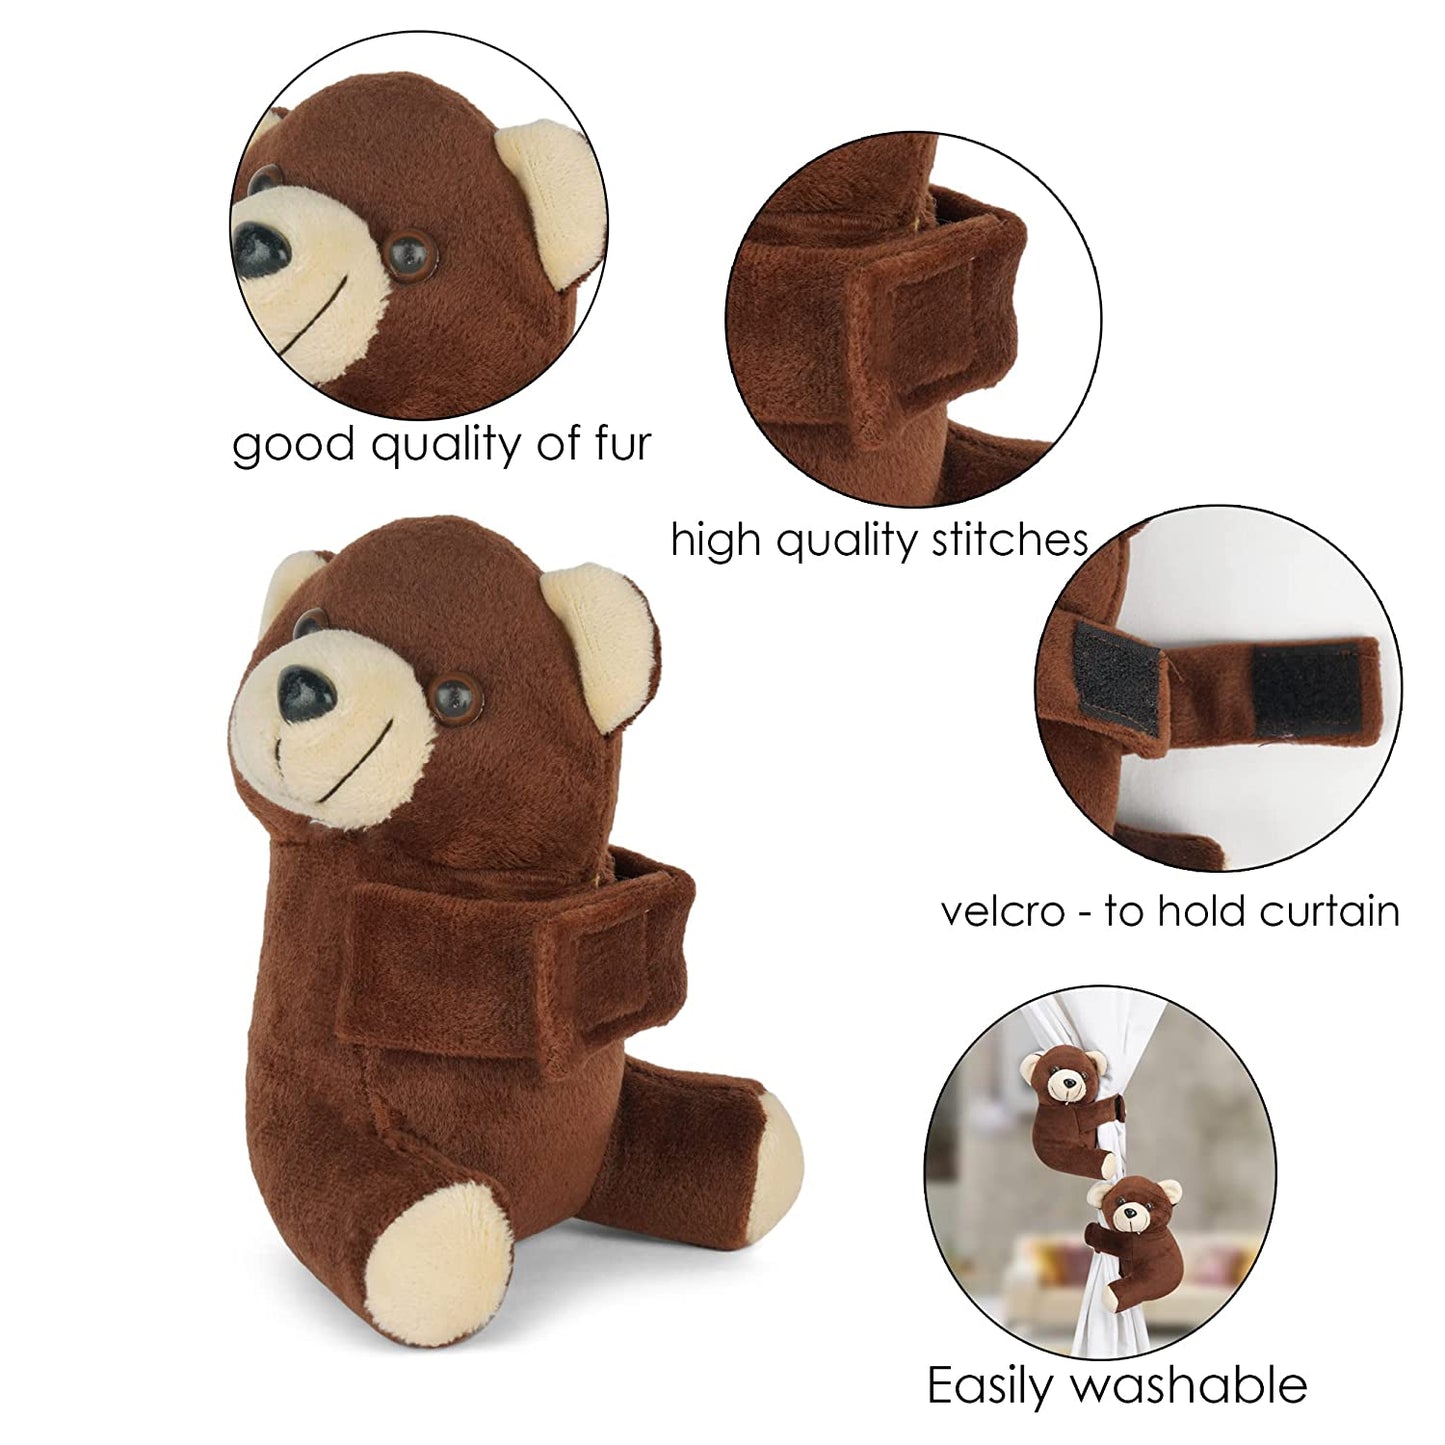 MM TOYS 4 Pcs Teddy Bear Soft Plush Toy Tieback Holdback Holder for Window Curtain Drapes Living Room Home Decoration Accessories for Children Pack of 2 - (5 X 6 Inch, Dark Brown)